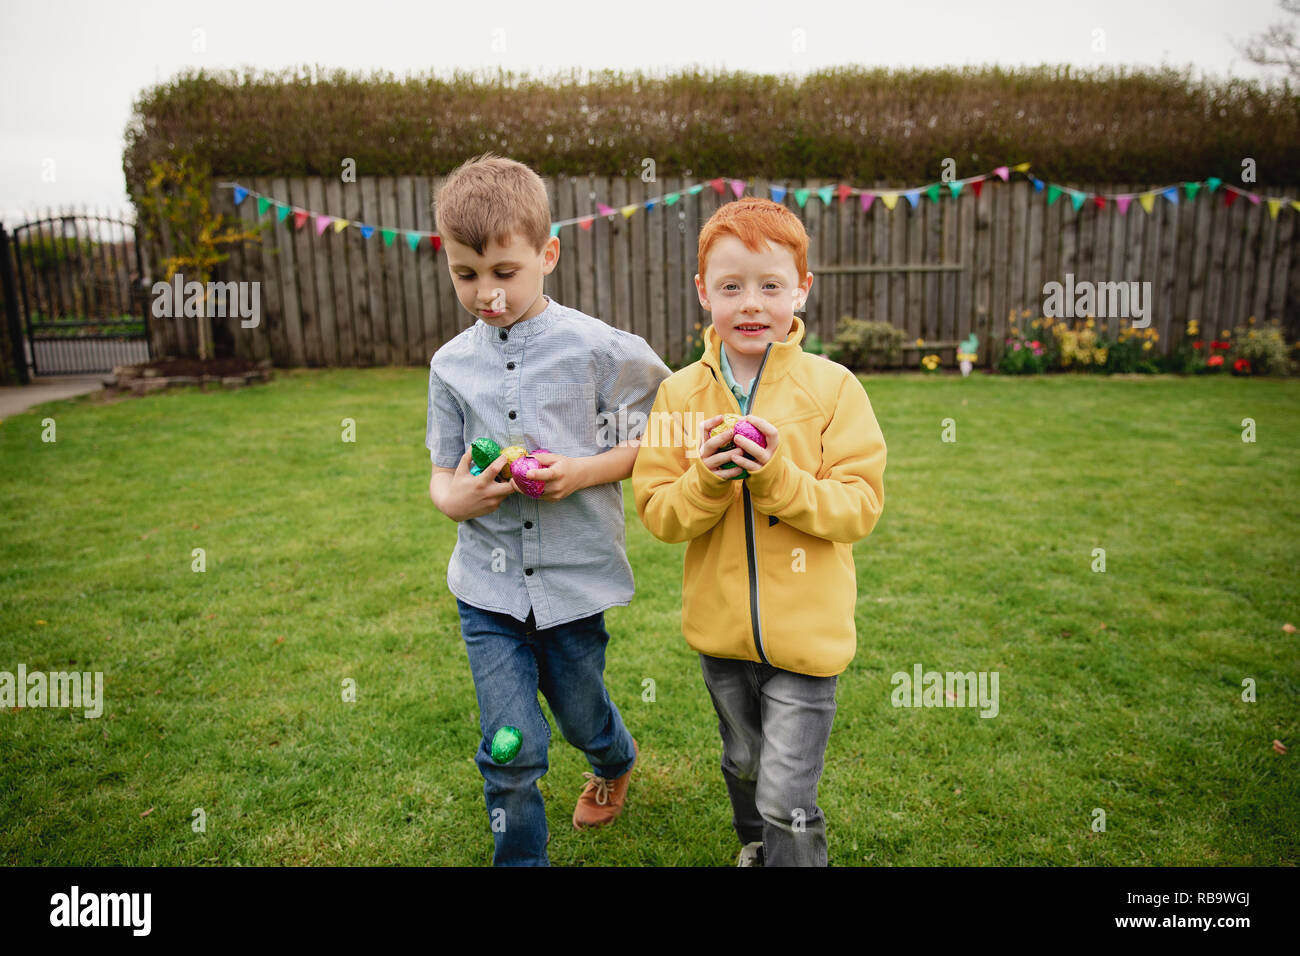 Two young boys walking through the back garden after an easter egg hunt. They are holding handfuls of chocolate eggs in their hands. Stock Photo